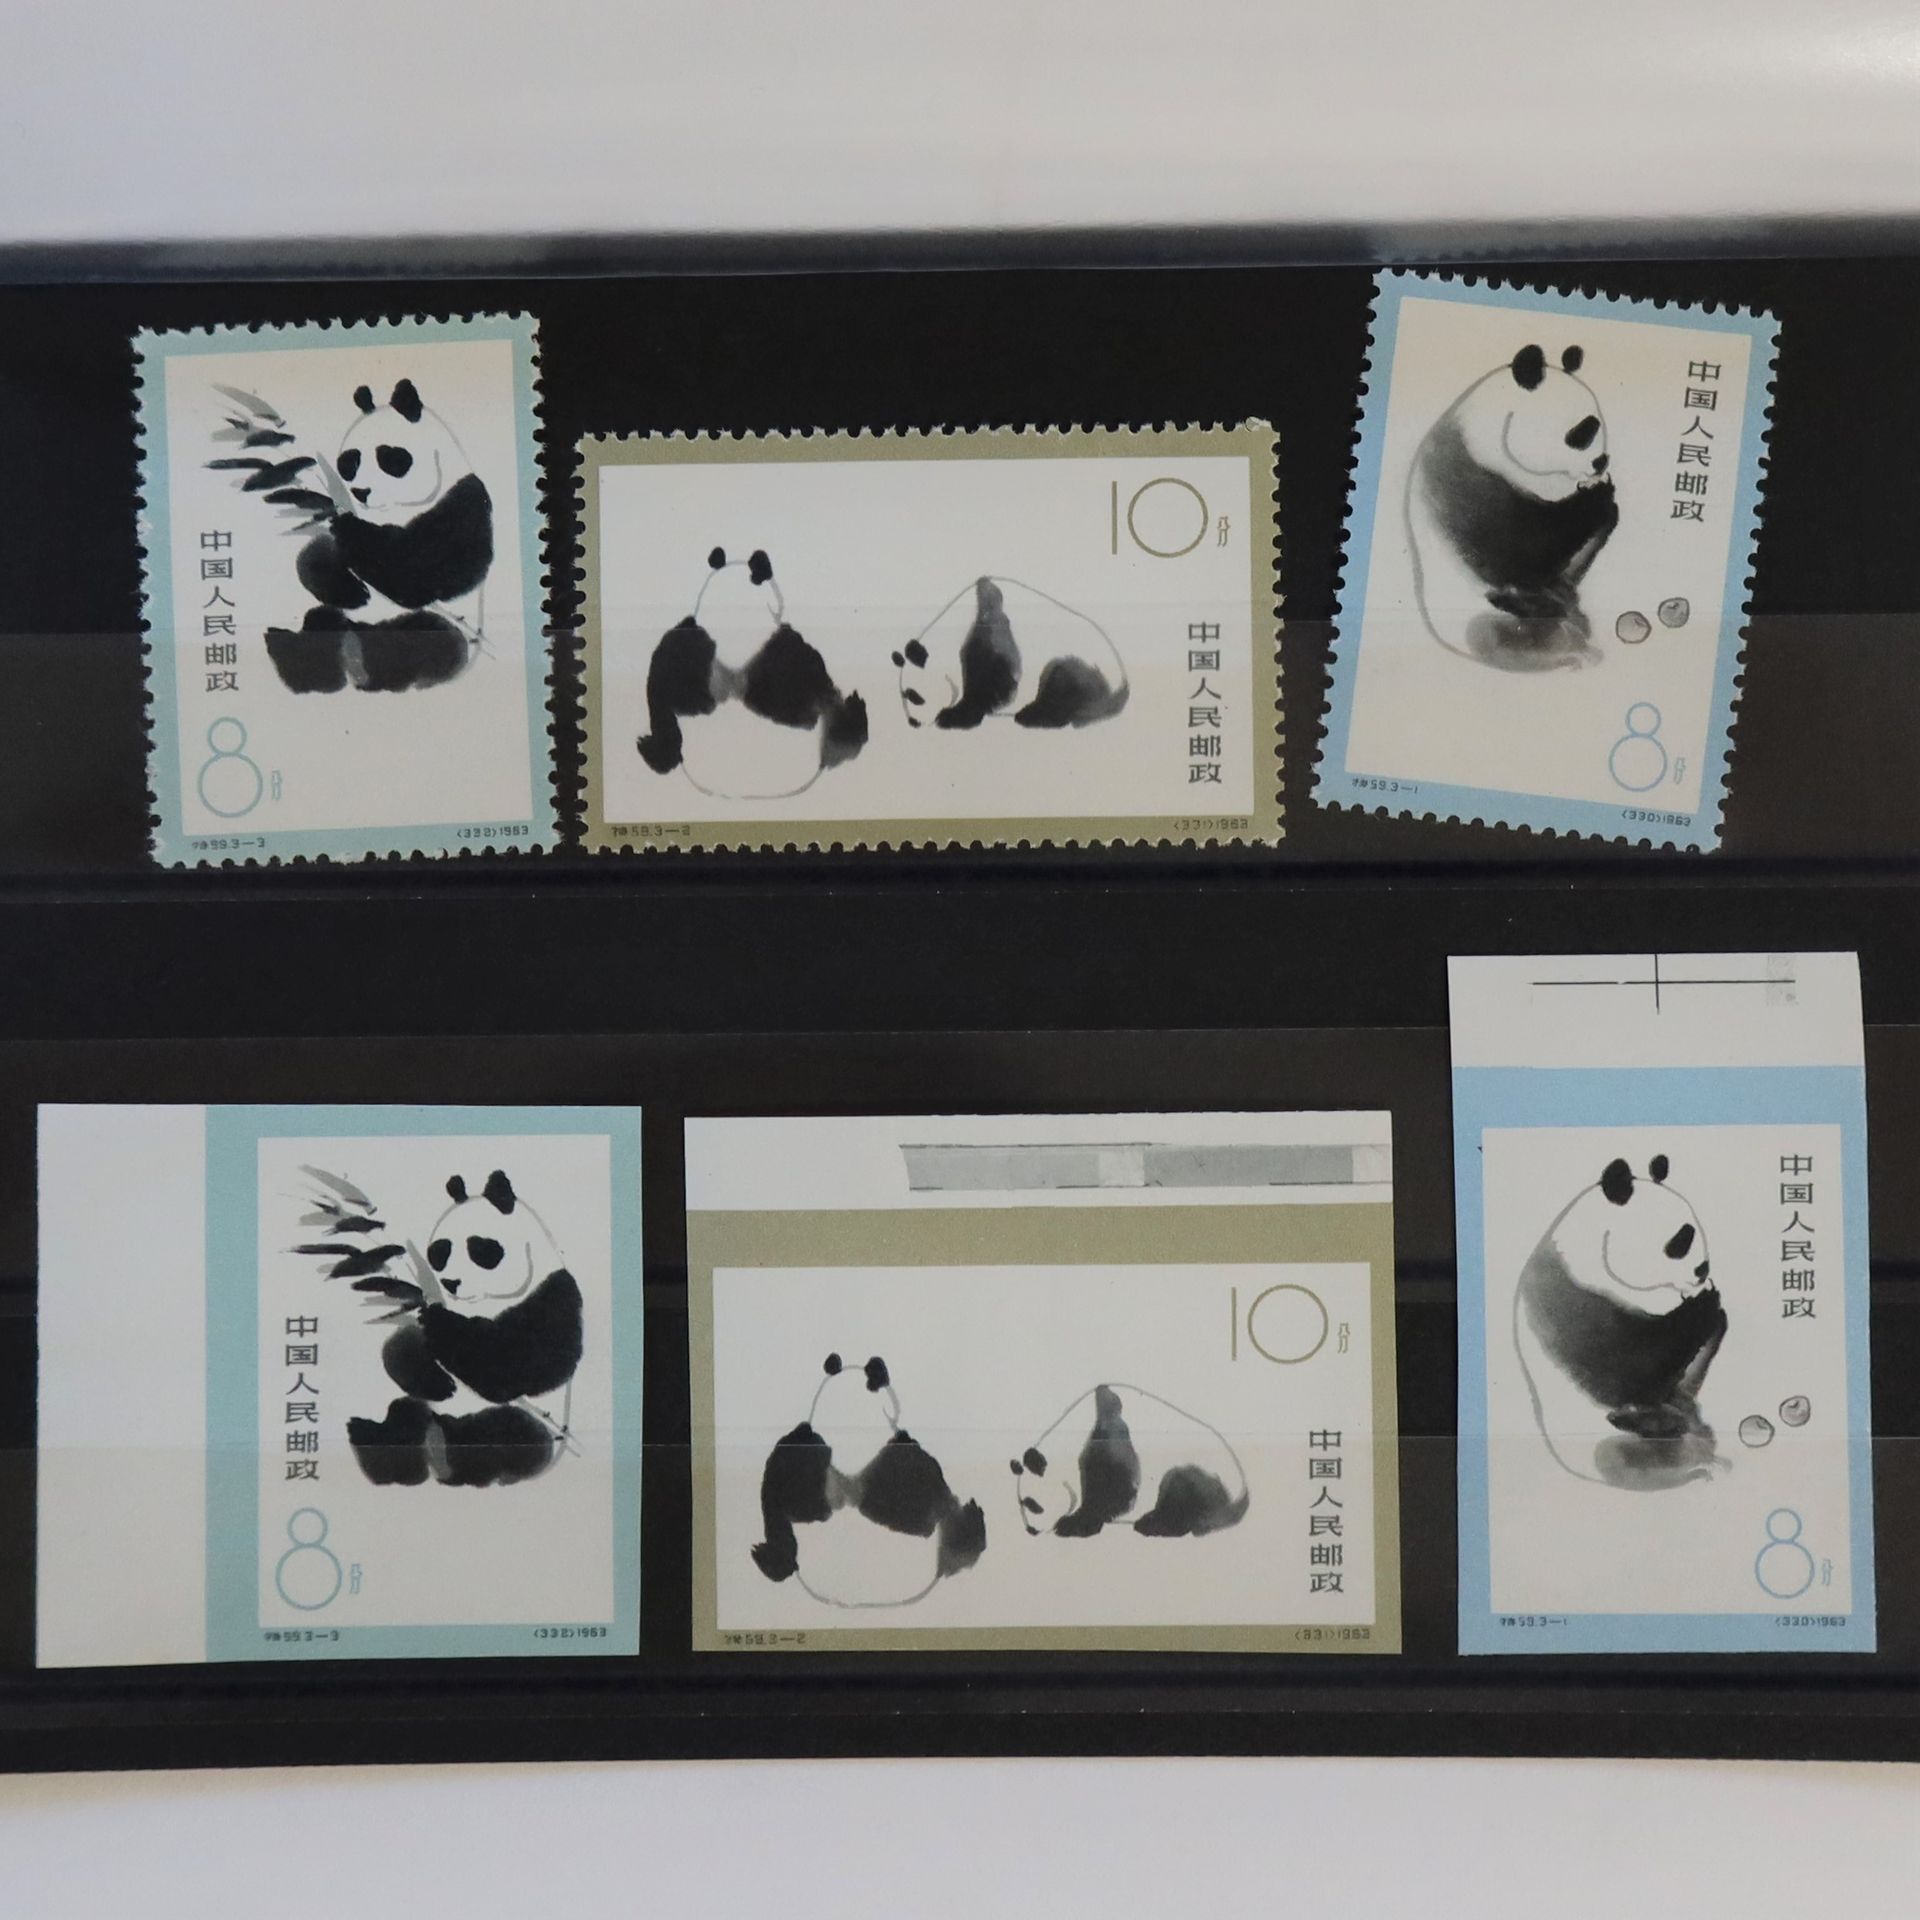 Null [CHINA]
Superb complete set n° 1493 to 1495 "Giant Panda", serrated and imp&hellip;